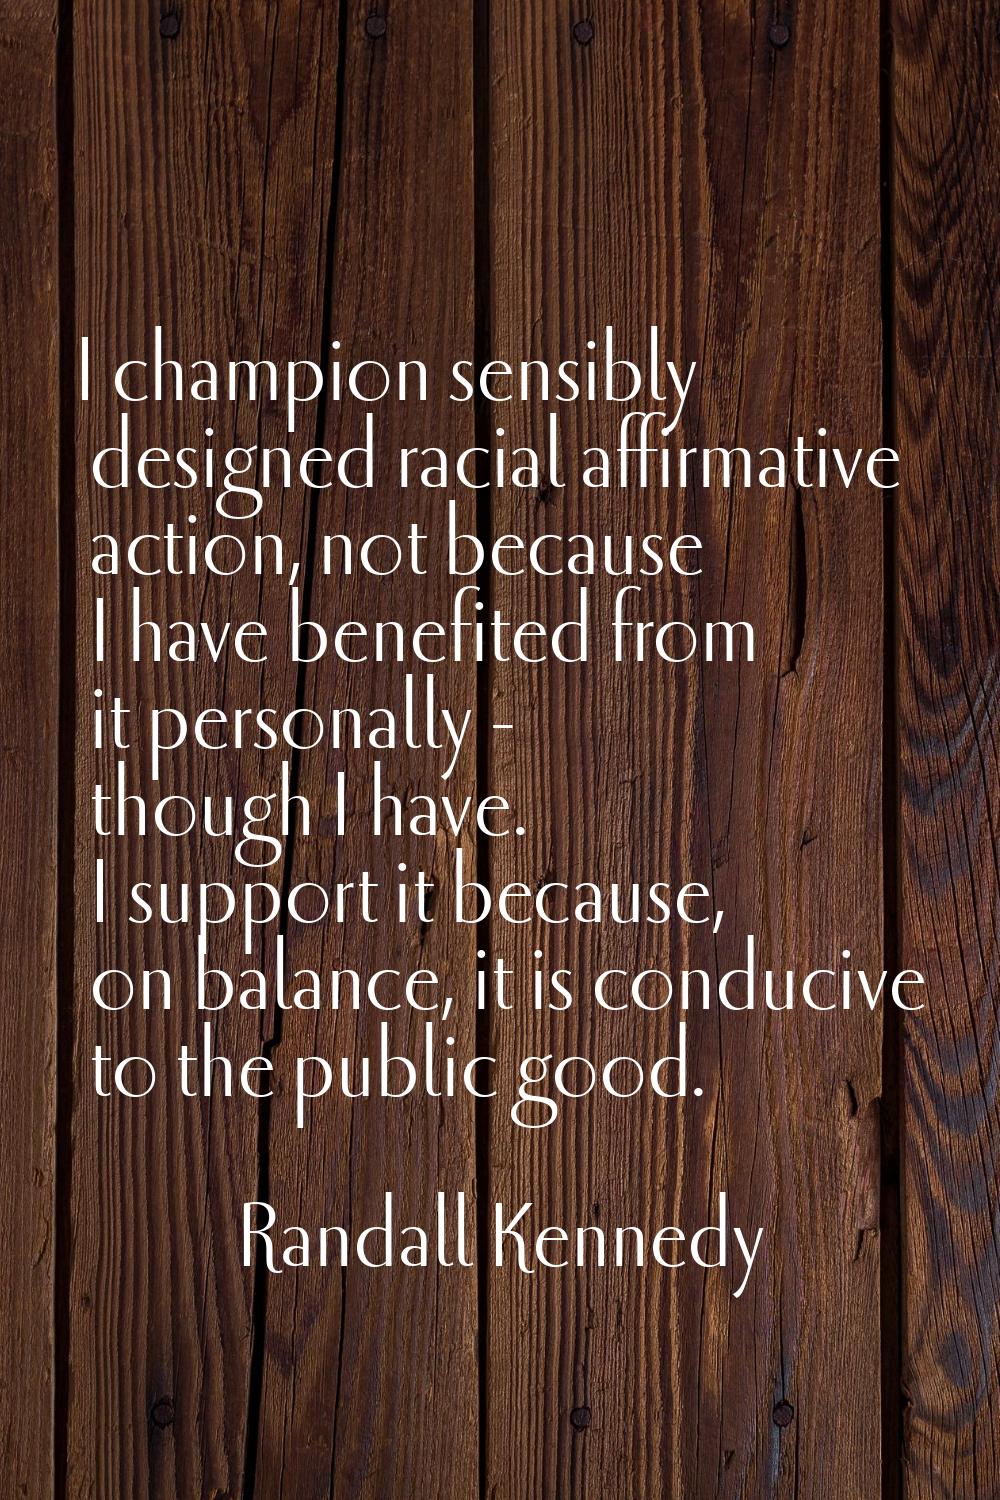 I champion sensibly designed racial affirmative action, not because I have benefited from it person